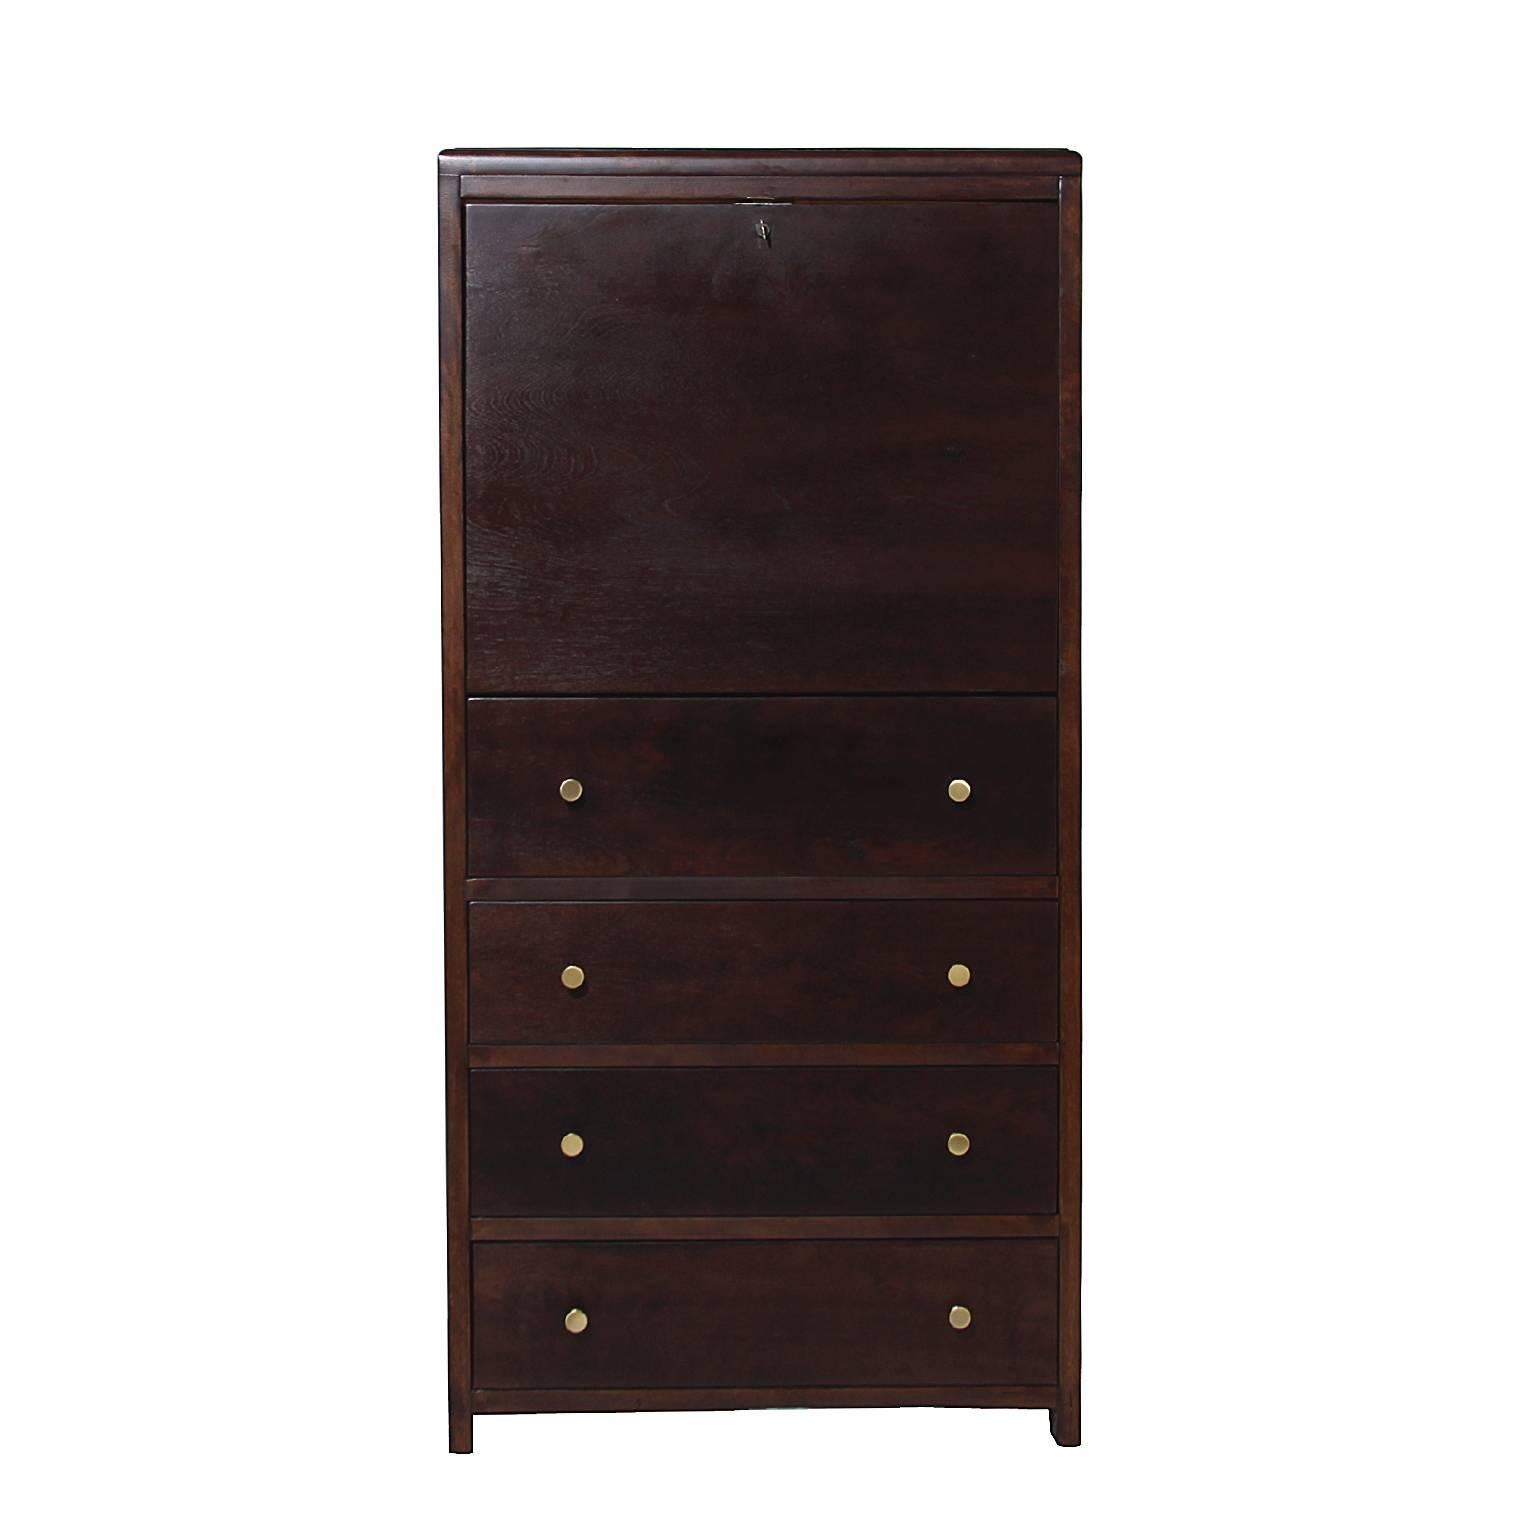 Vintage cabinet with brass pulls and black glass top. 

Many pieces are stored in our warehouse, so please click on "Contact Dealer" button under our logo below to find out if the pieces you are interested in seeing are on the gallery